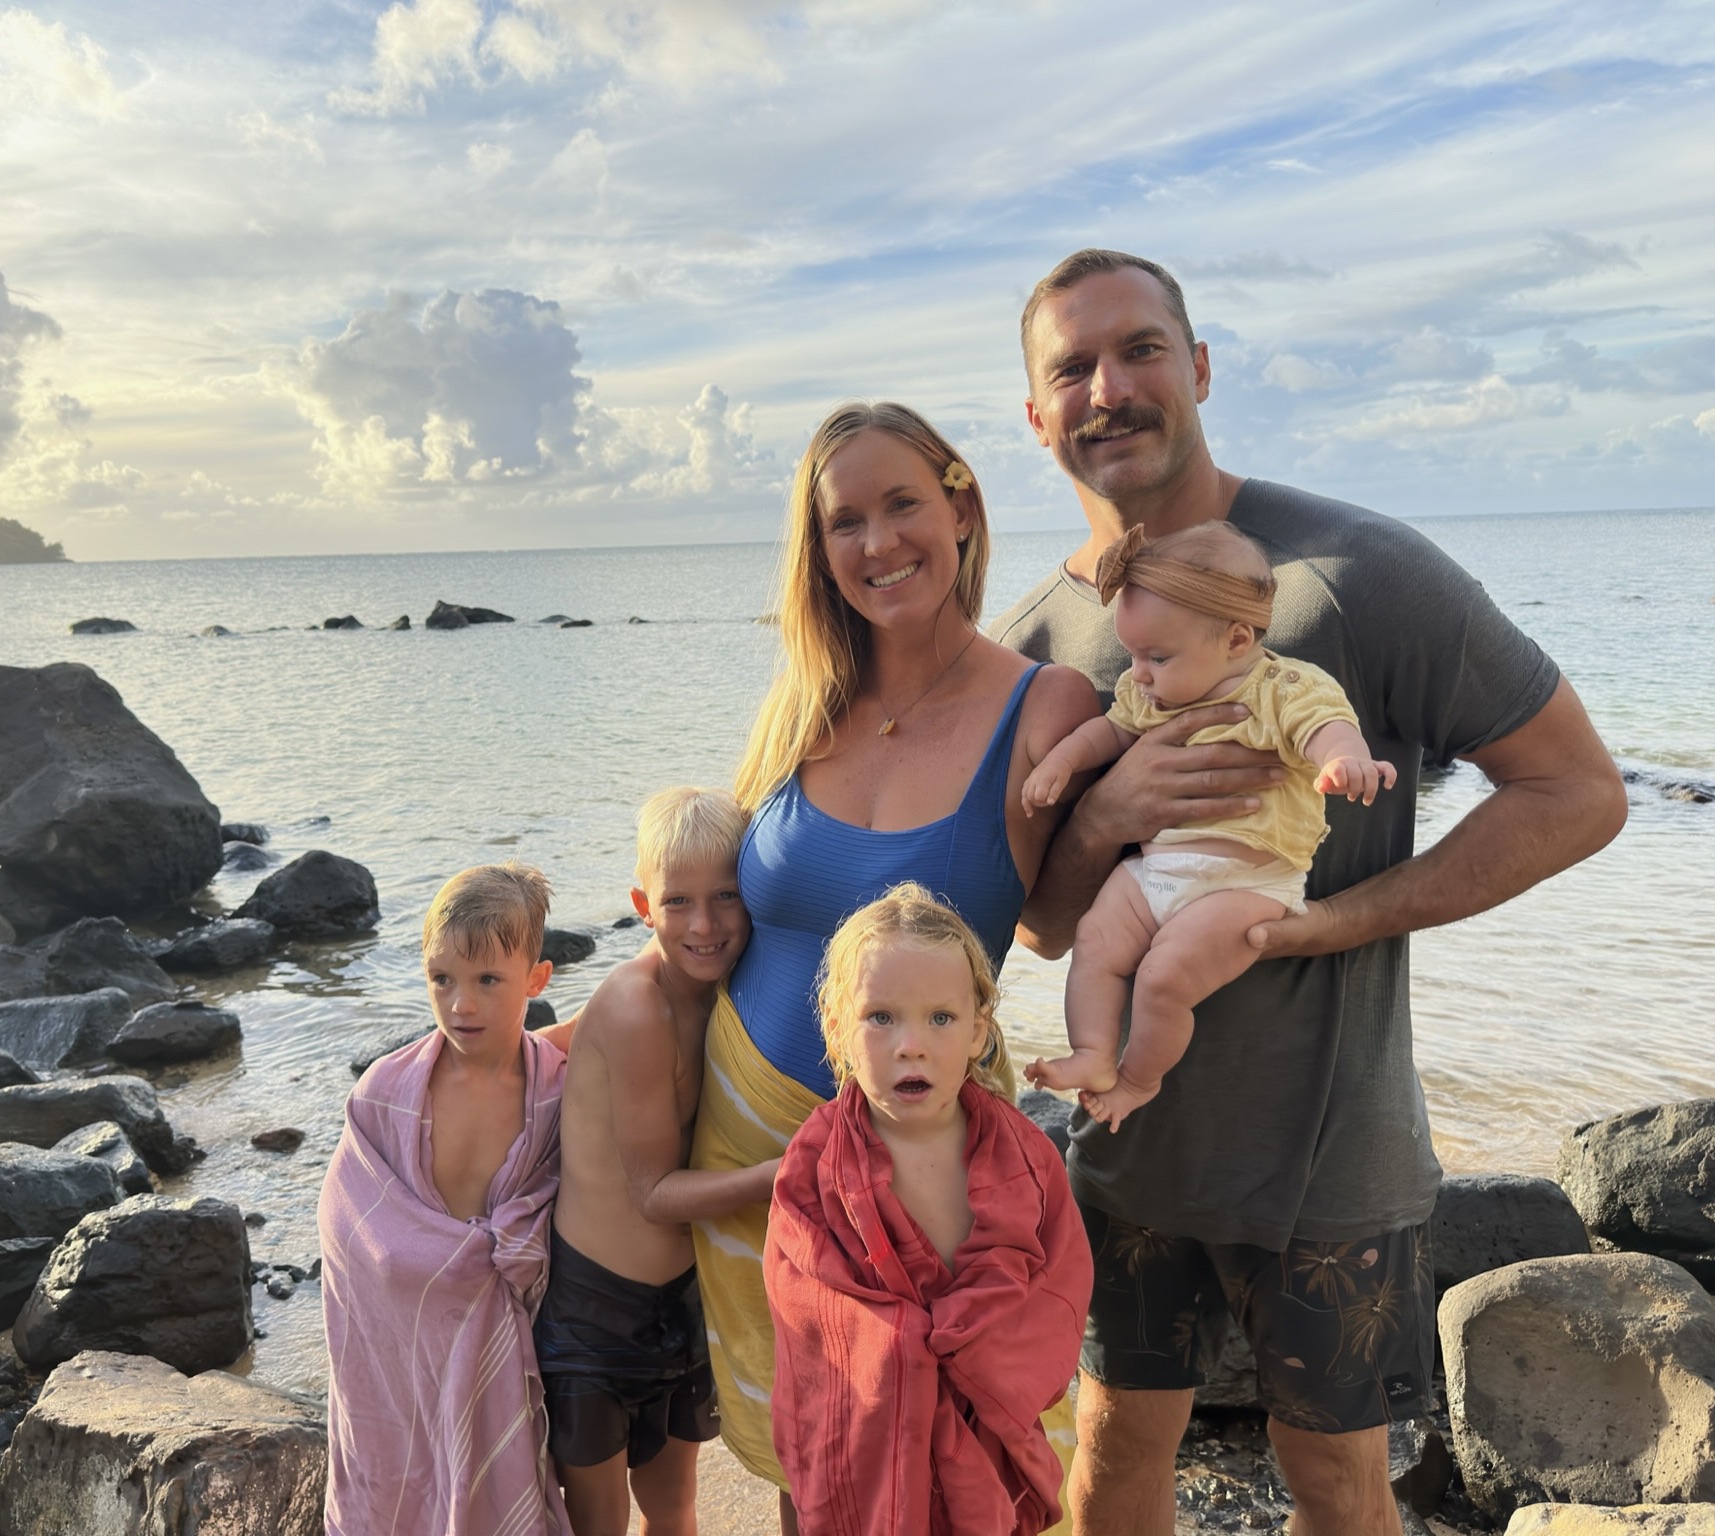 Bethany's family poses by the beach with their newborn daughter